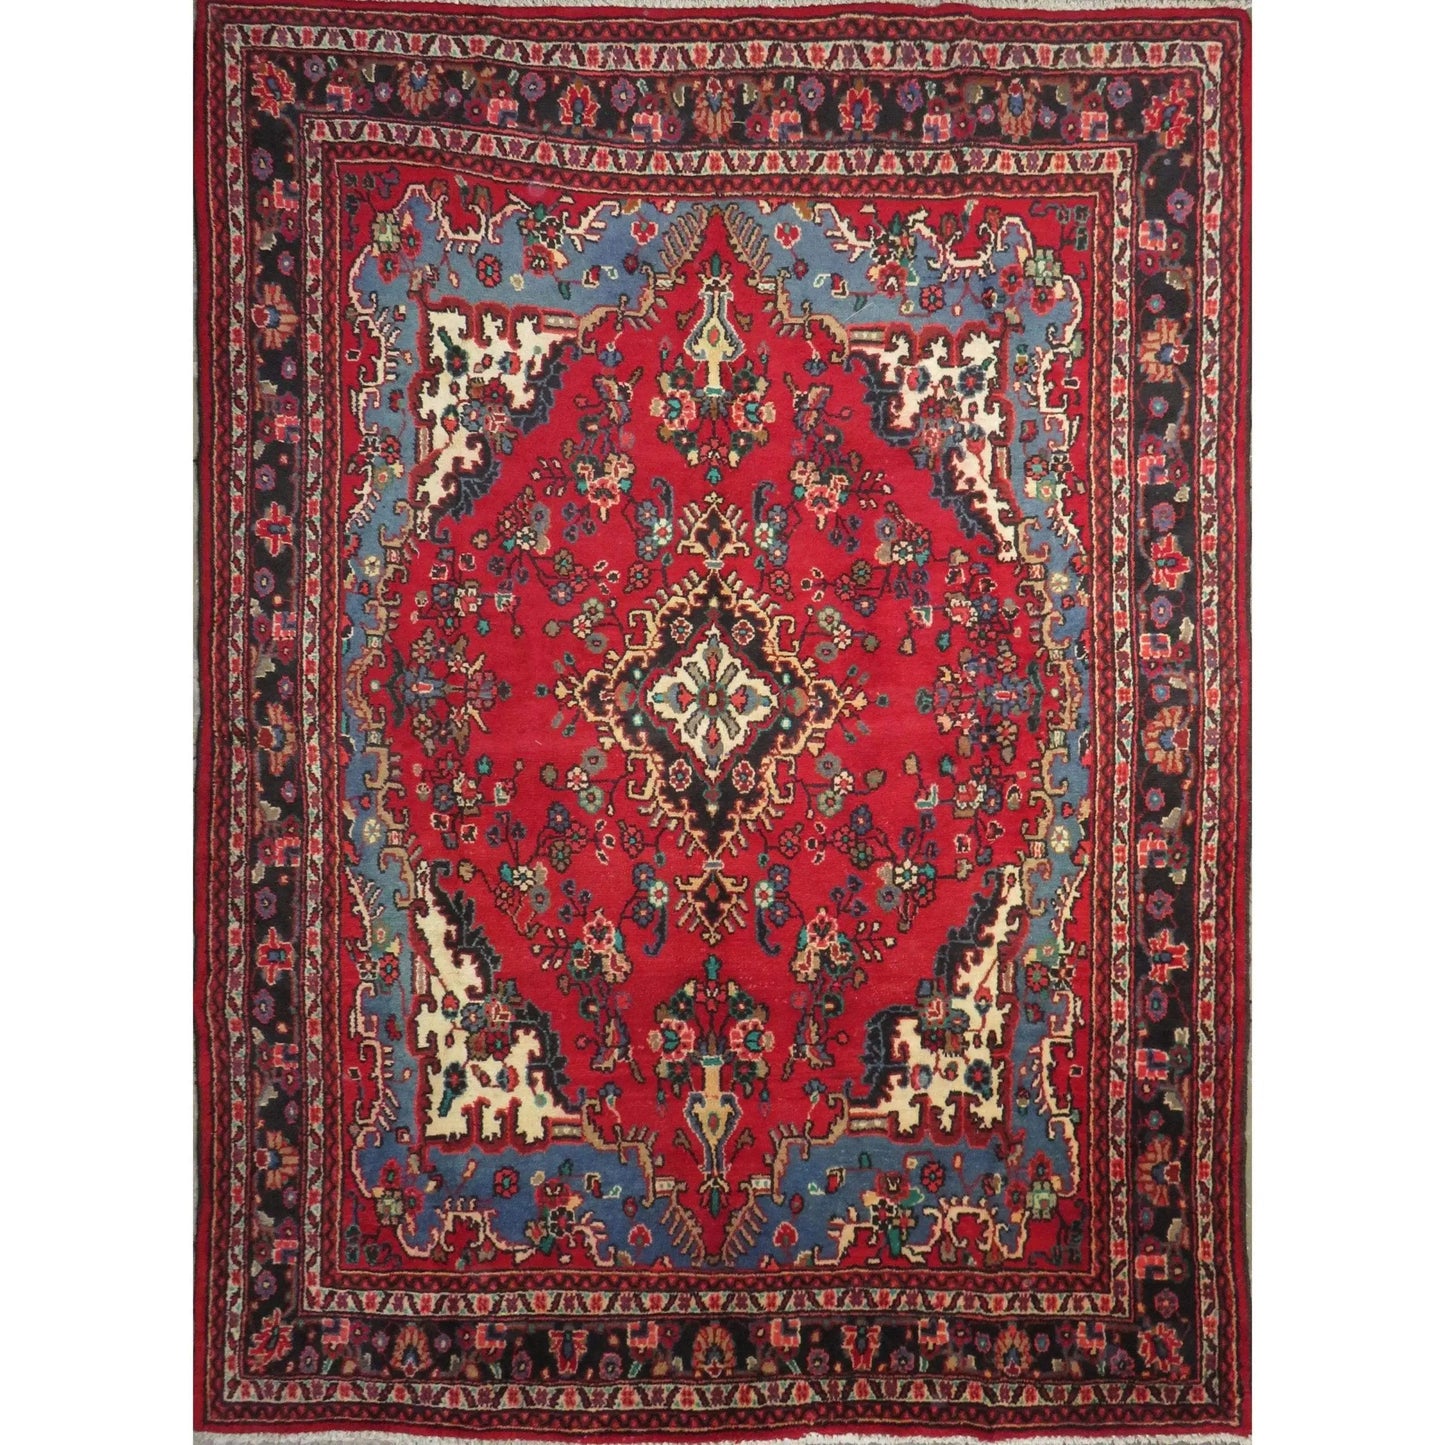 Hand-Knotted Persian Wool Rug _ Luxurious Vintage Design, 10' x 7'3", Artisan Crafted